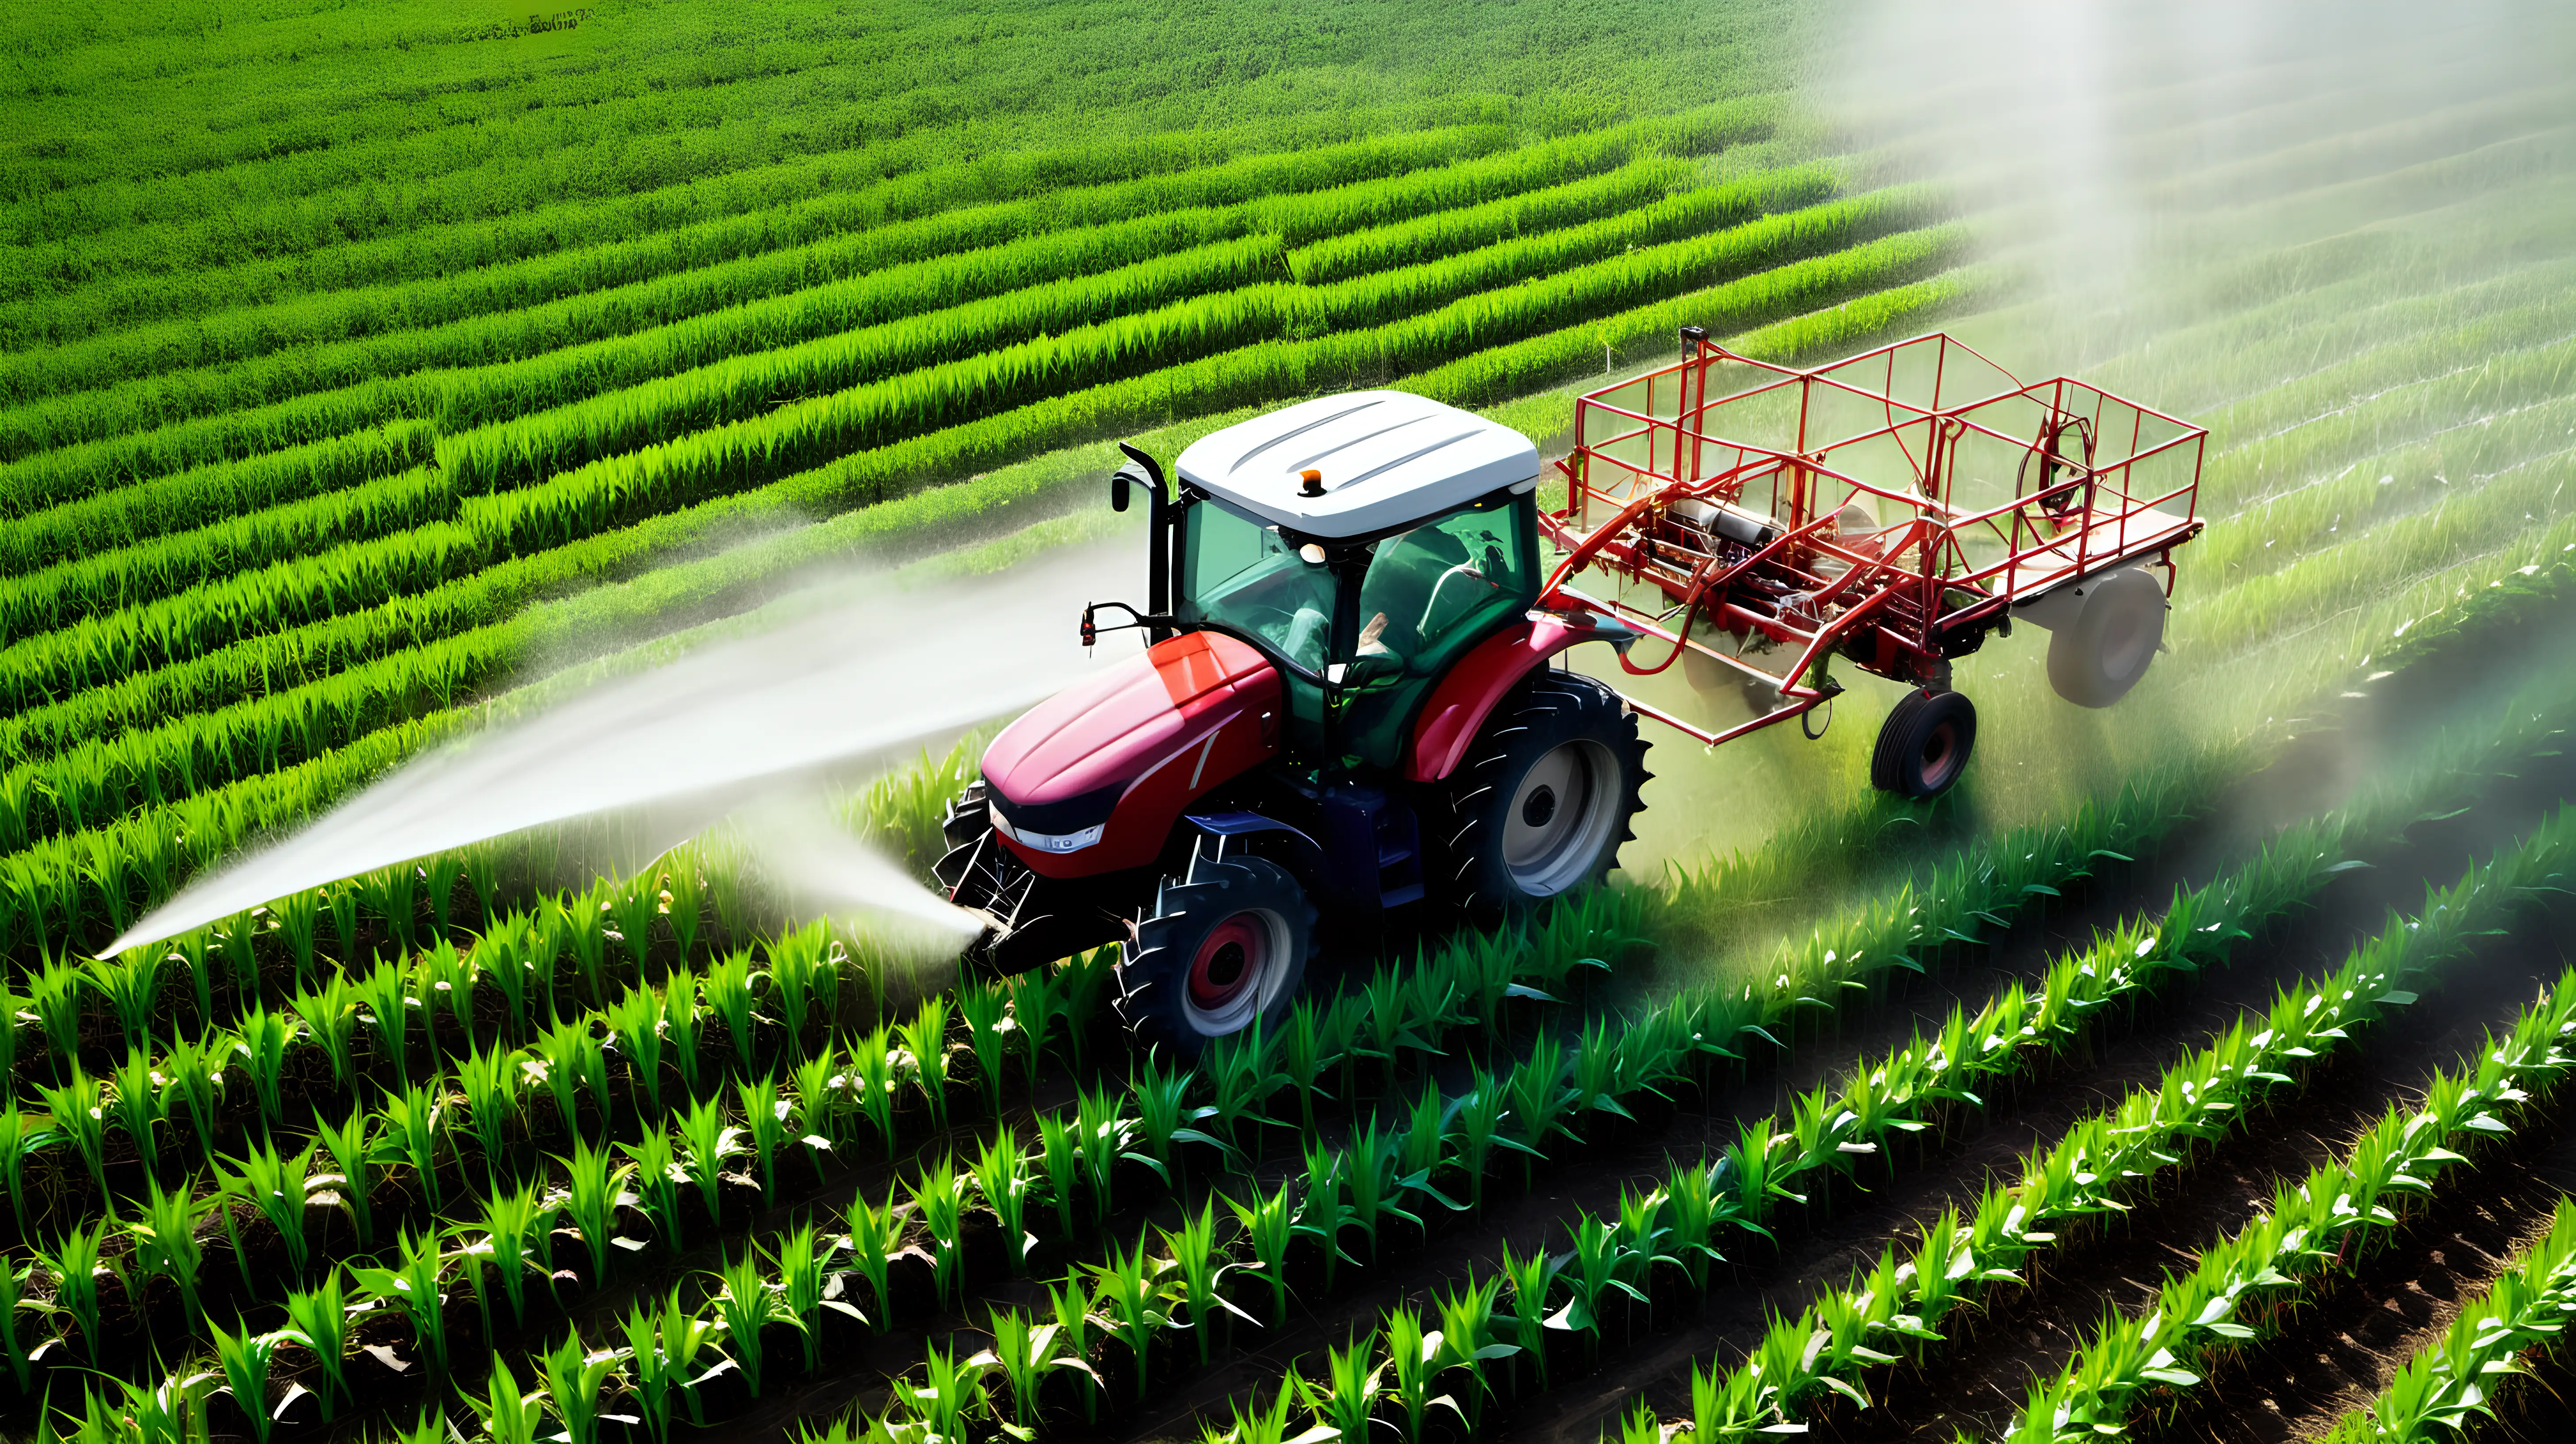 Agricultural Tractor Spraying Pesticides on Lush Cornfield Plantation